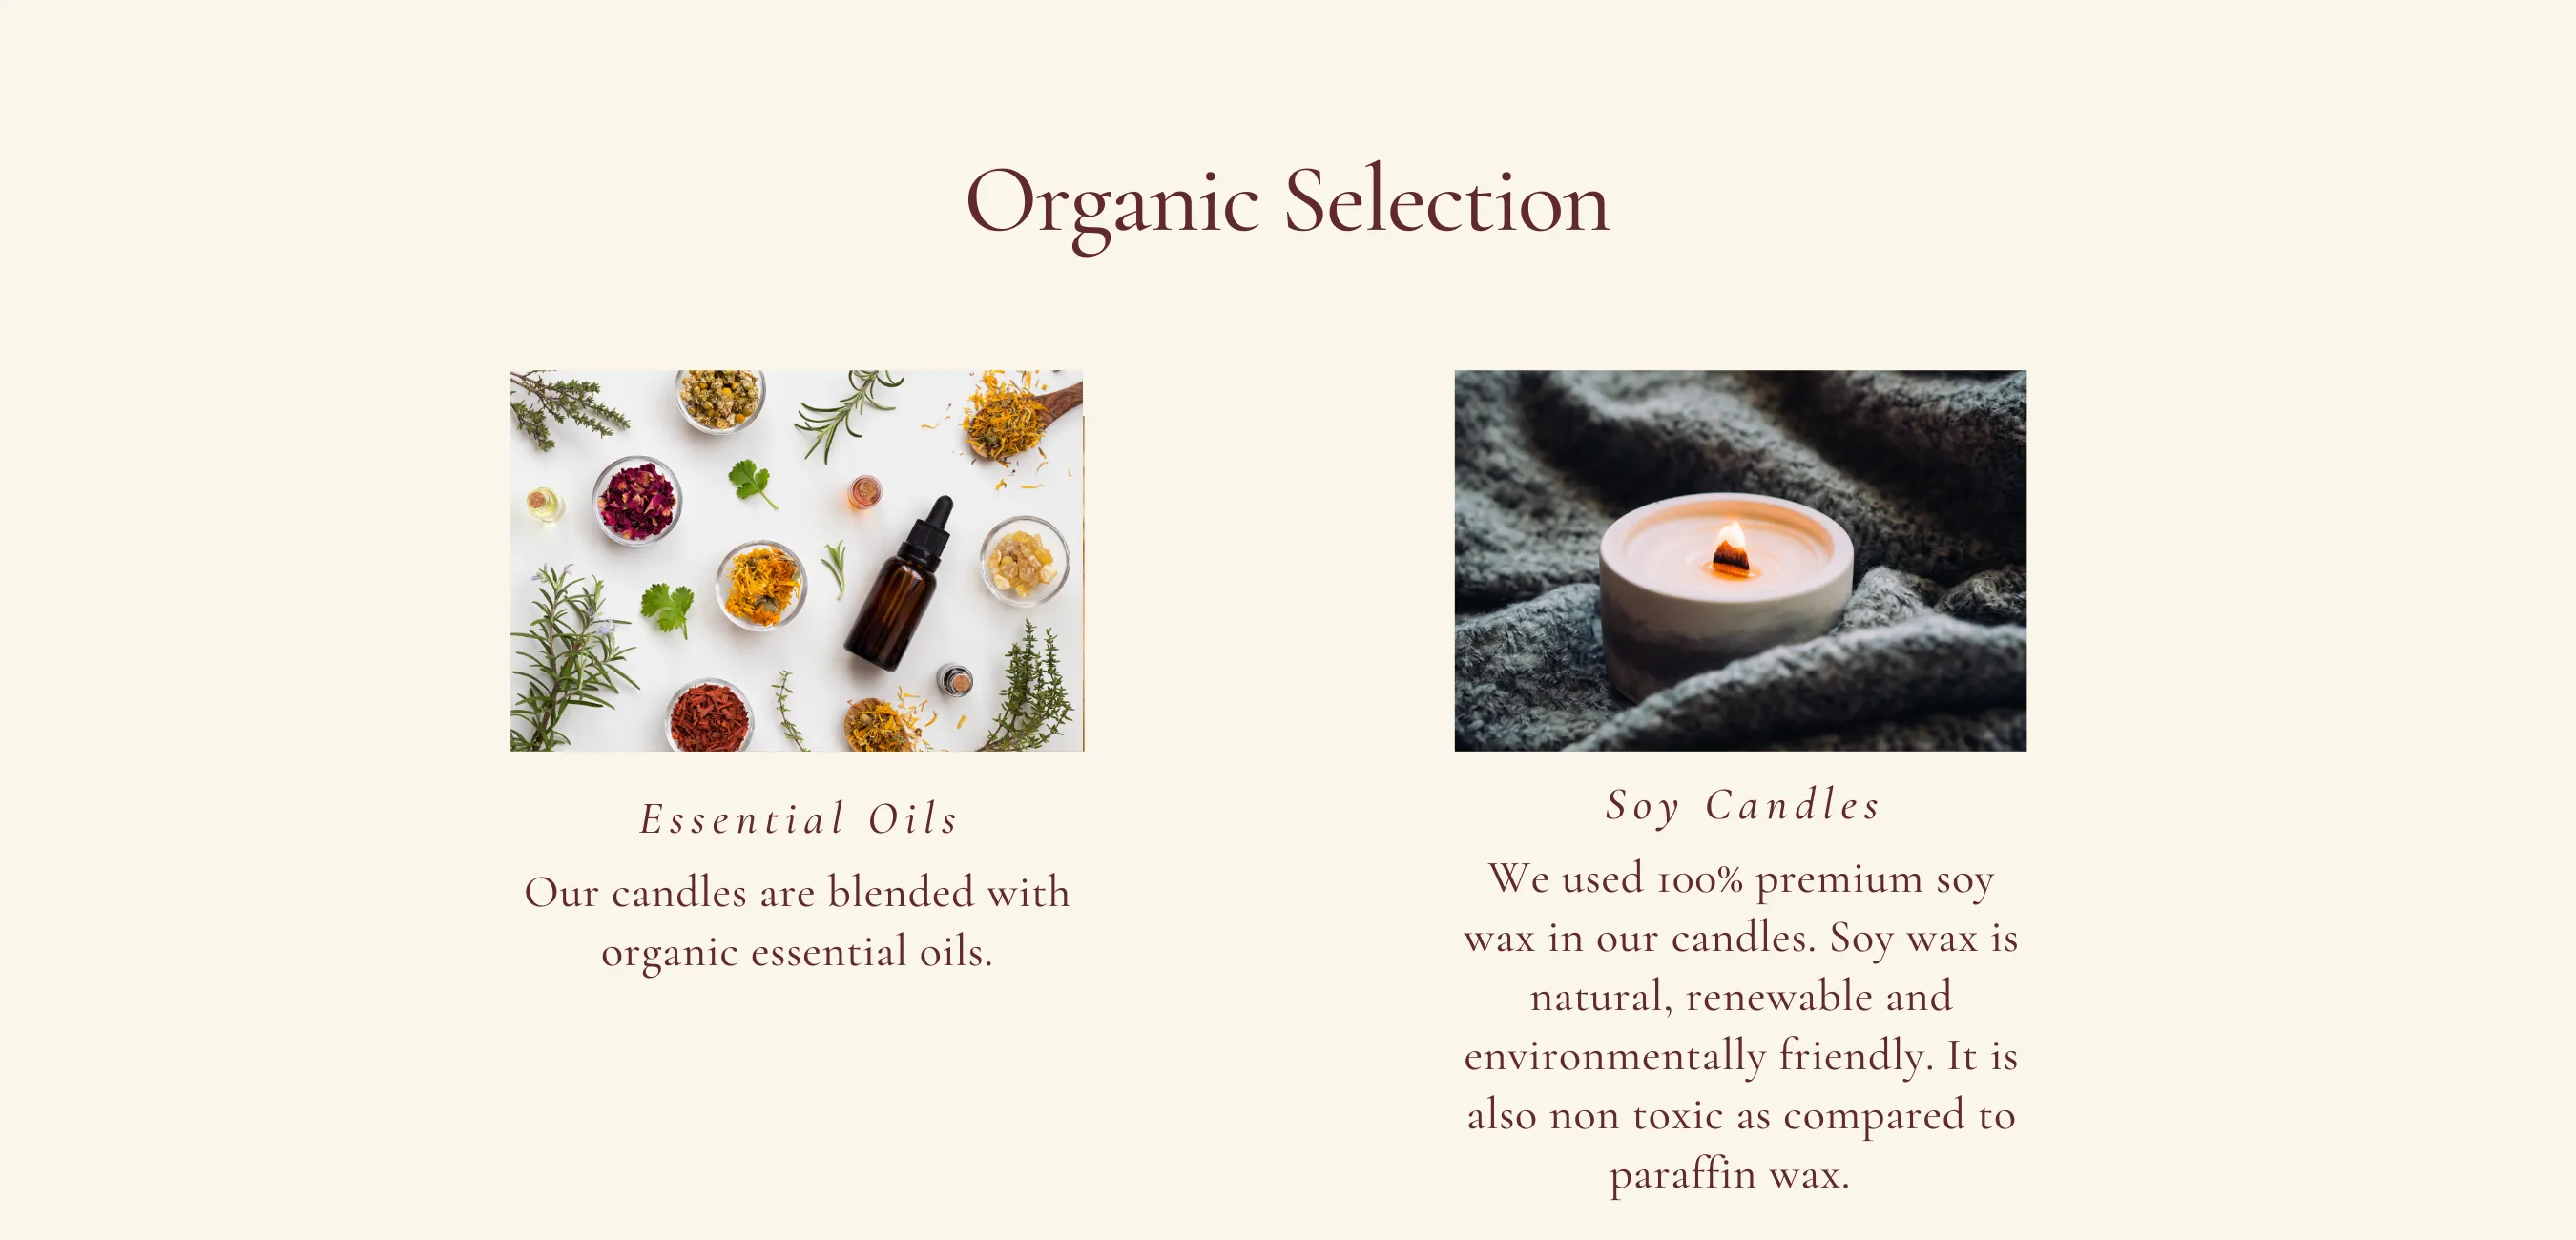 Our candles are blended with organic essential oils. Soy Candles. We used 100% premium soy wax in our candles. Soy wax is natural, renewable and environmentally friend. It is also non toxic as compared to paraffin wax.